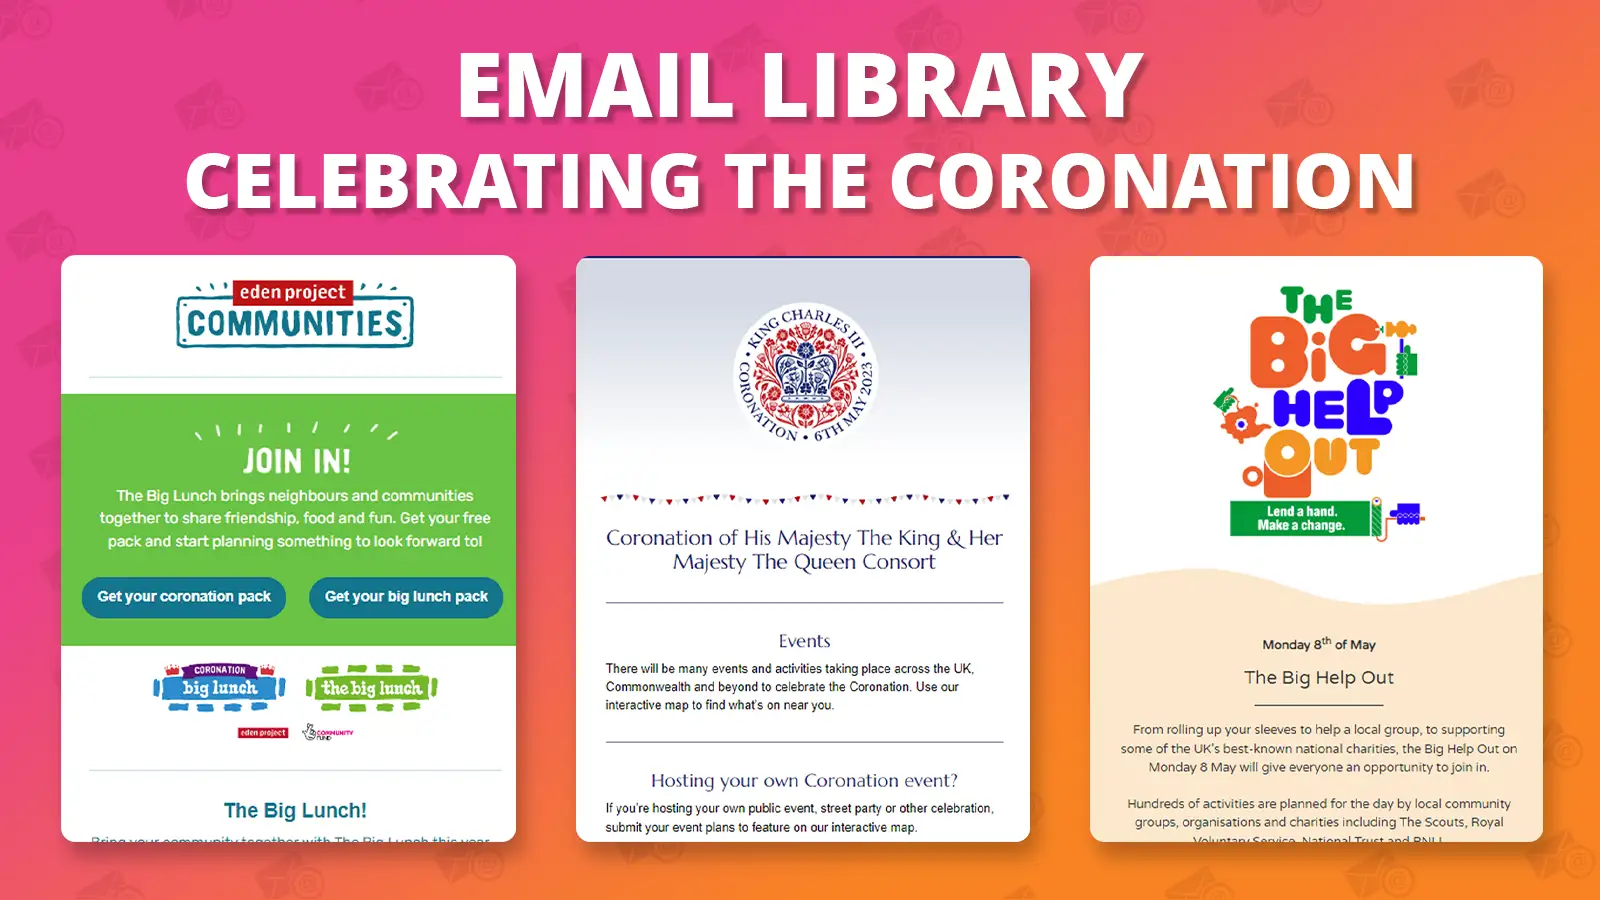 Email Library: Celebrating the Coronation